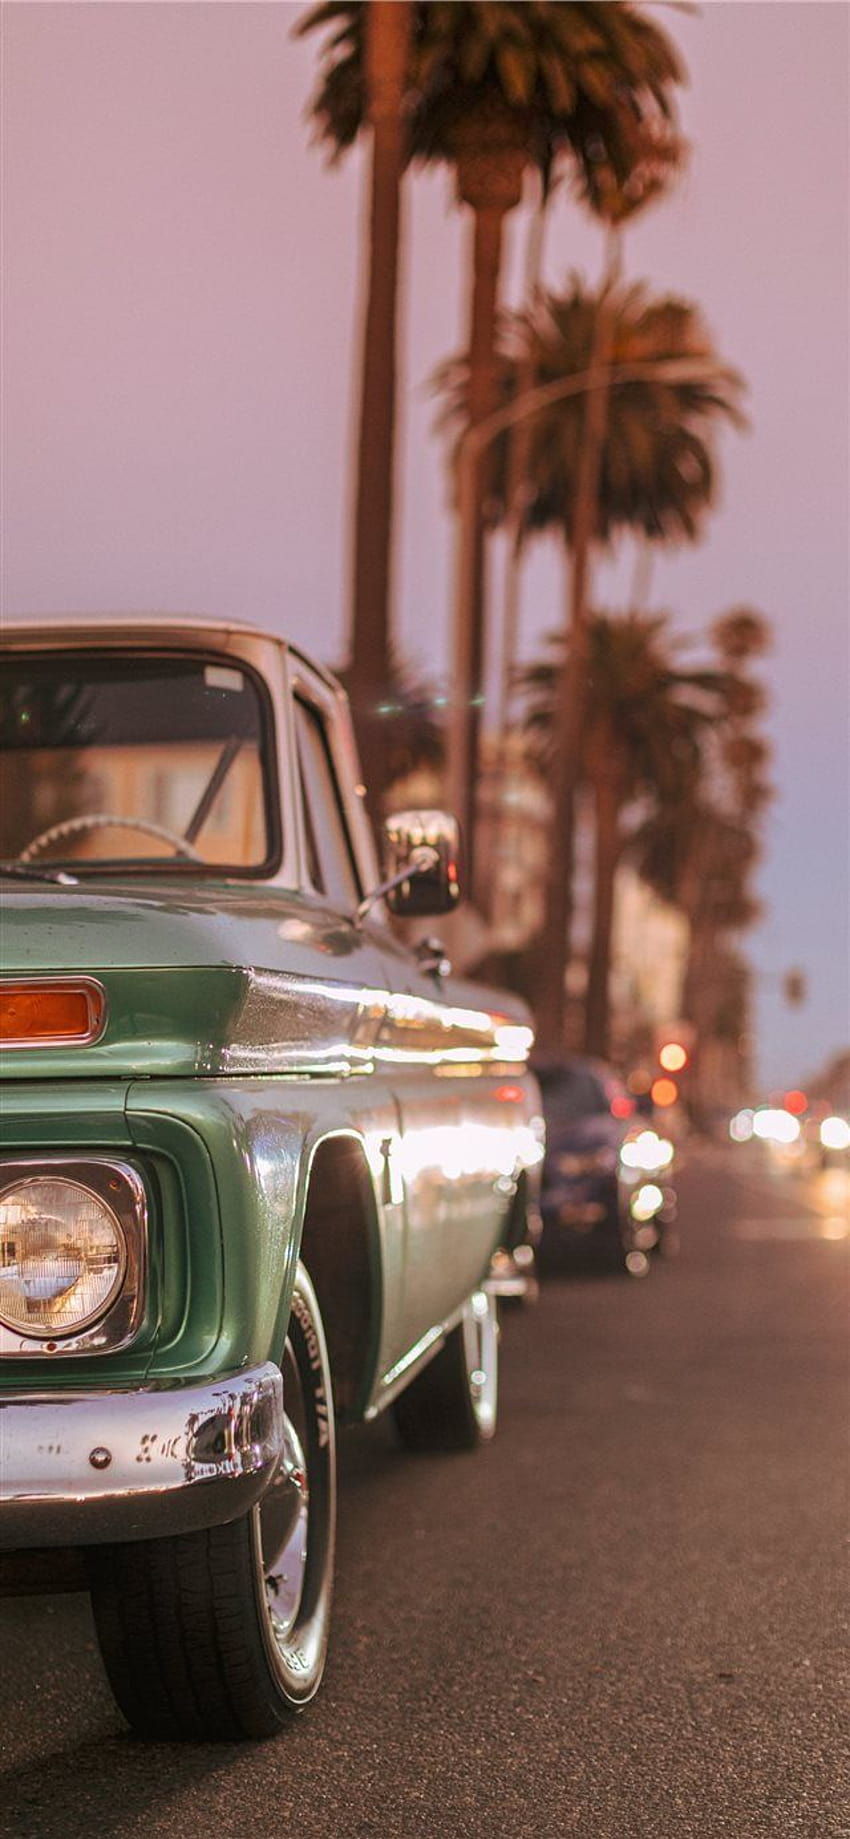 Vintage car parked on Ocean Blvd during sunset iPhone X, retro car sunset HD phone wallpaper